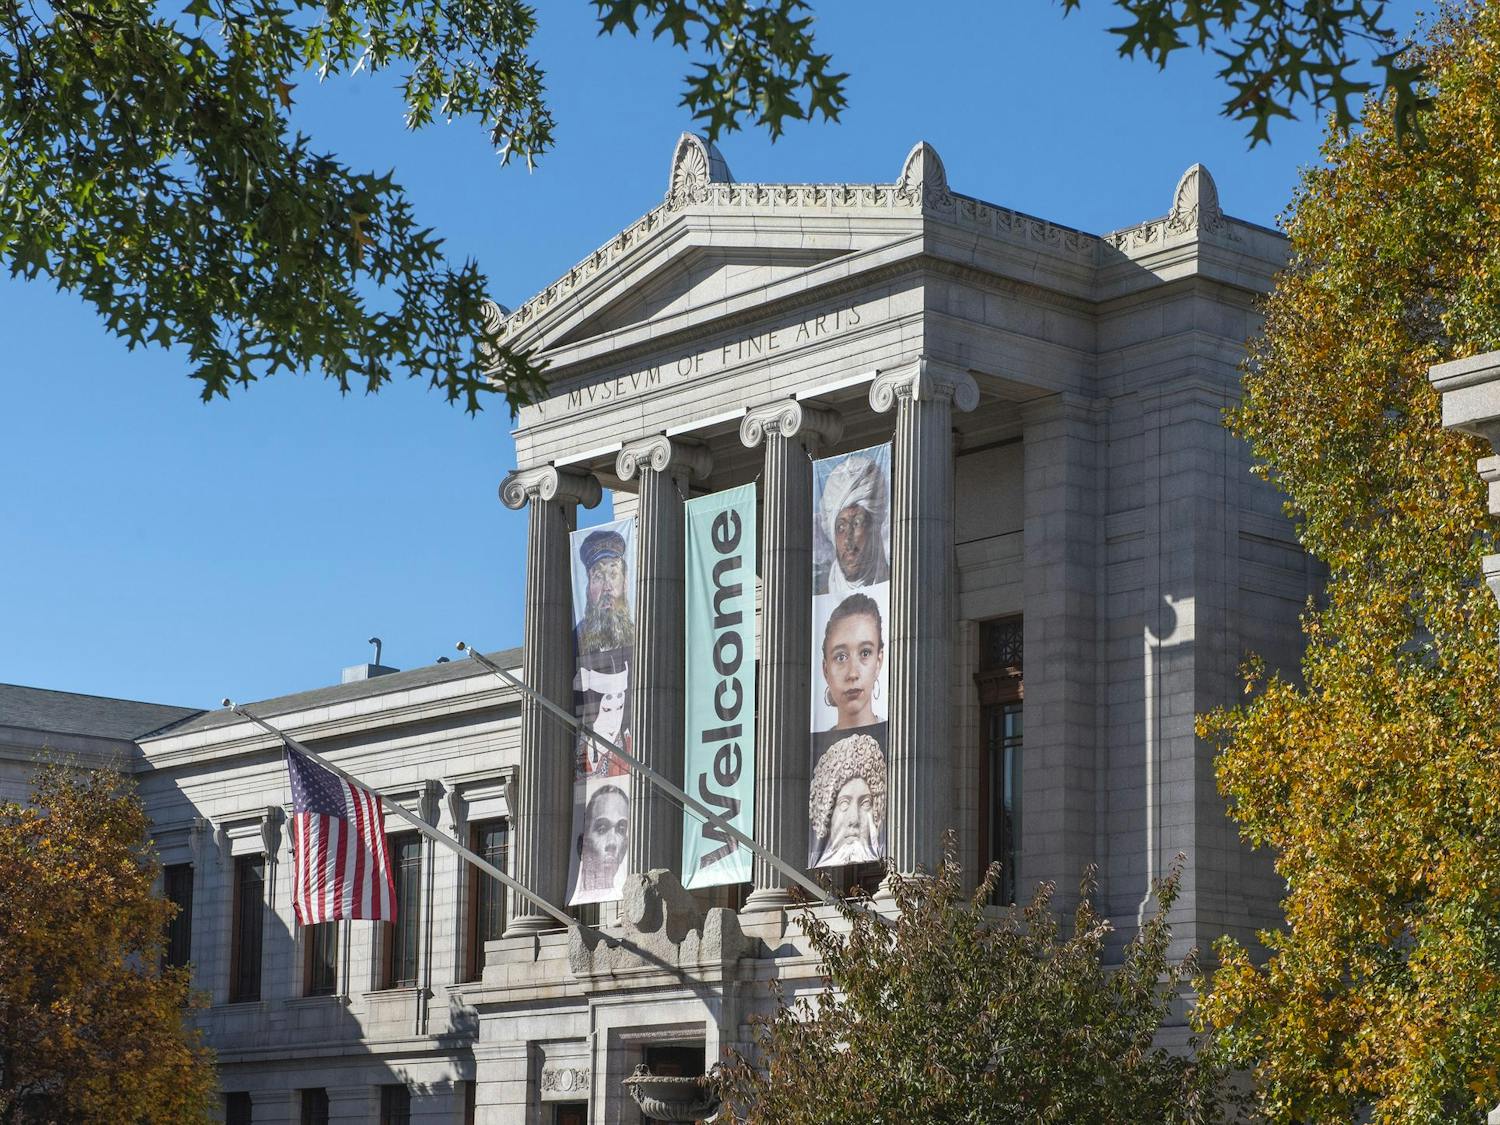 The Museum of Fine Arts is pictured.